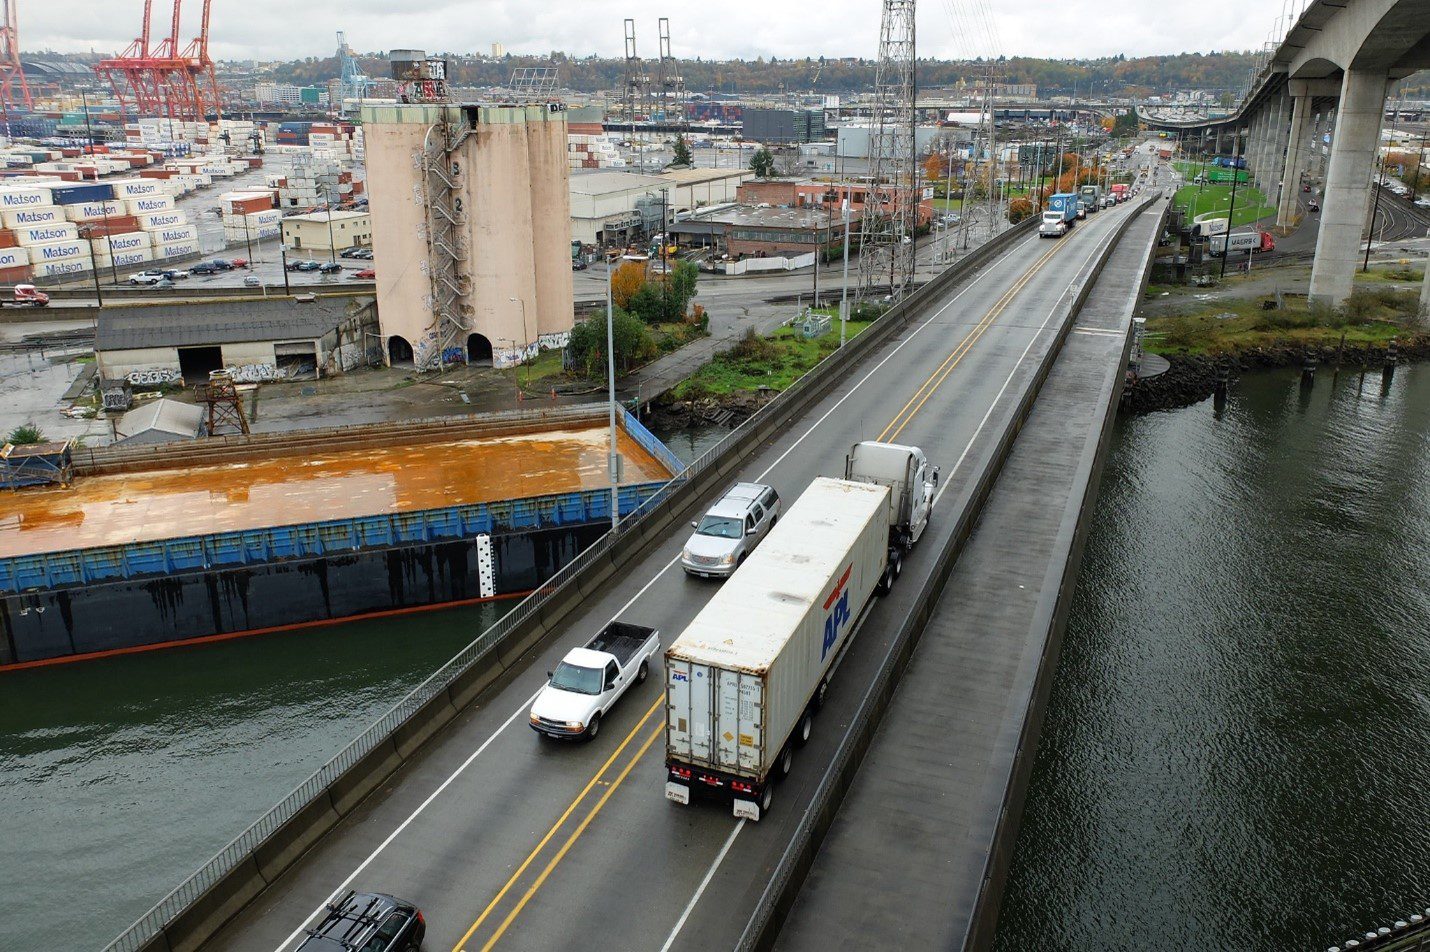 Several cars and a large truck travel on a bridge over a waterway with buildings and a barge in the background.